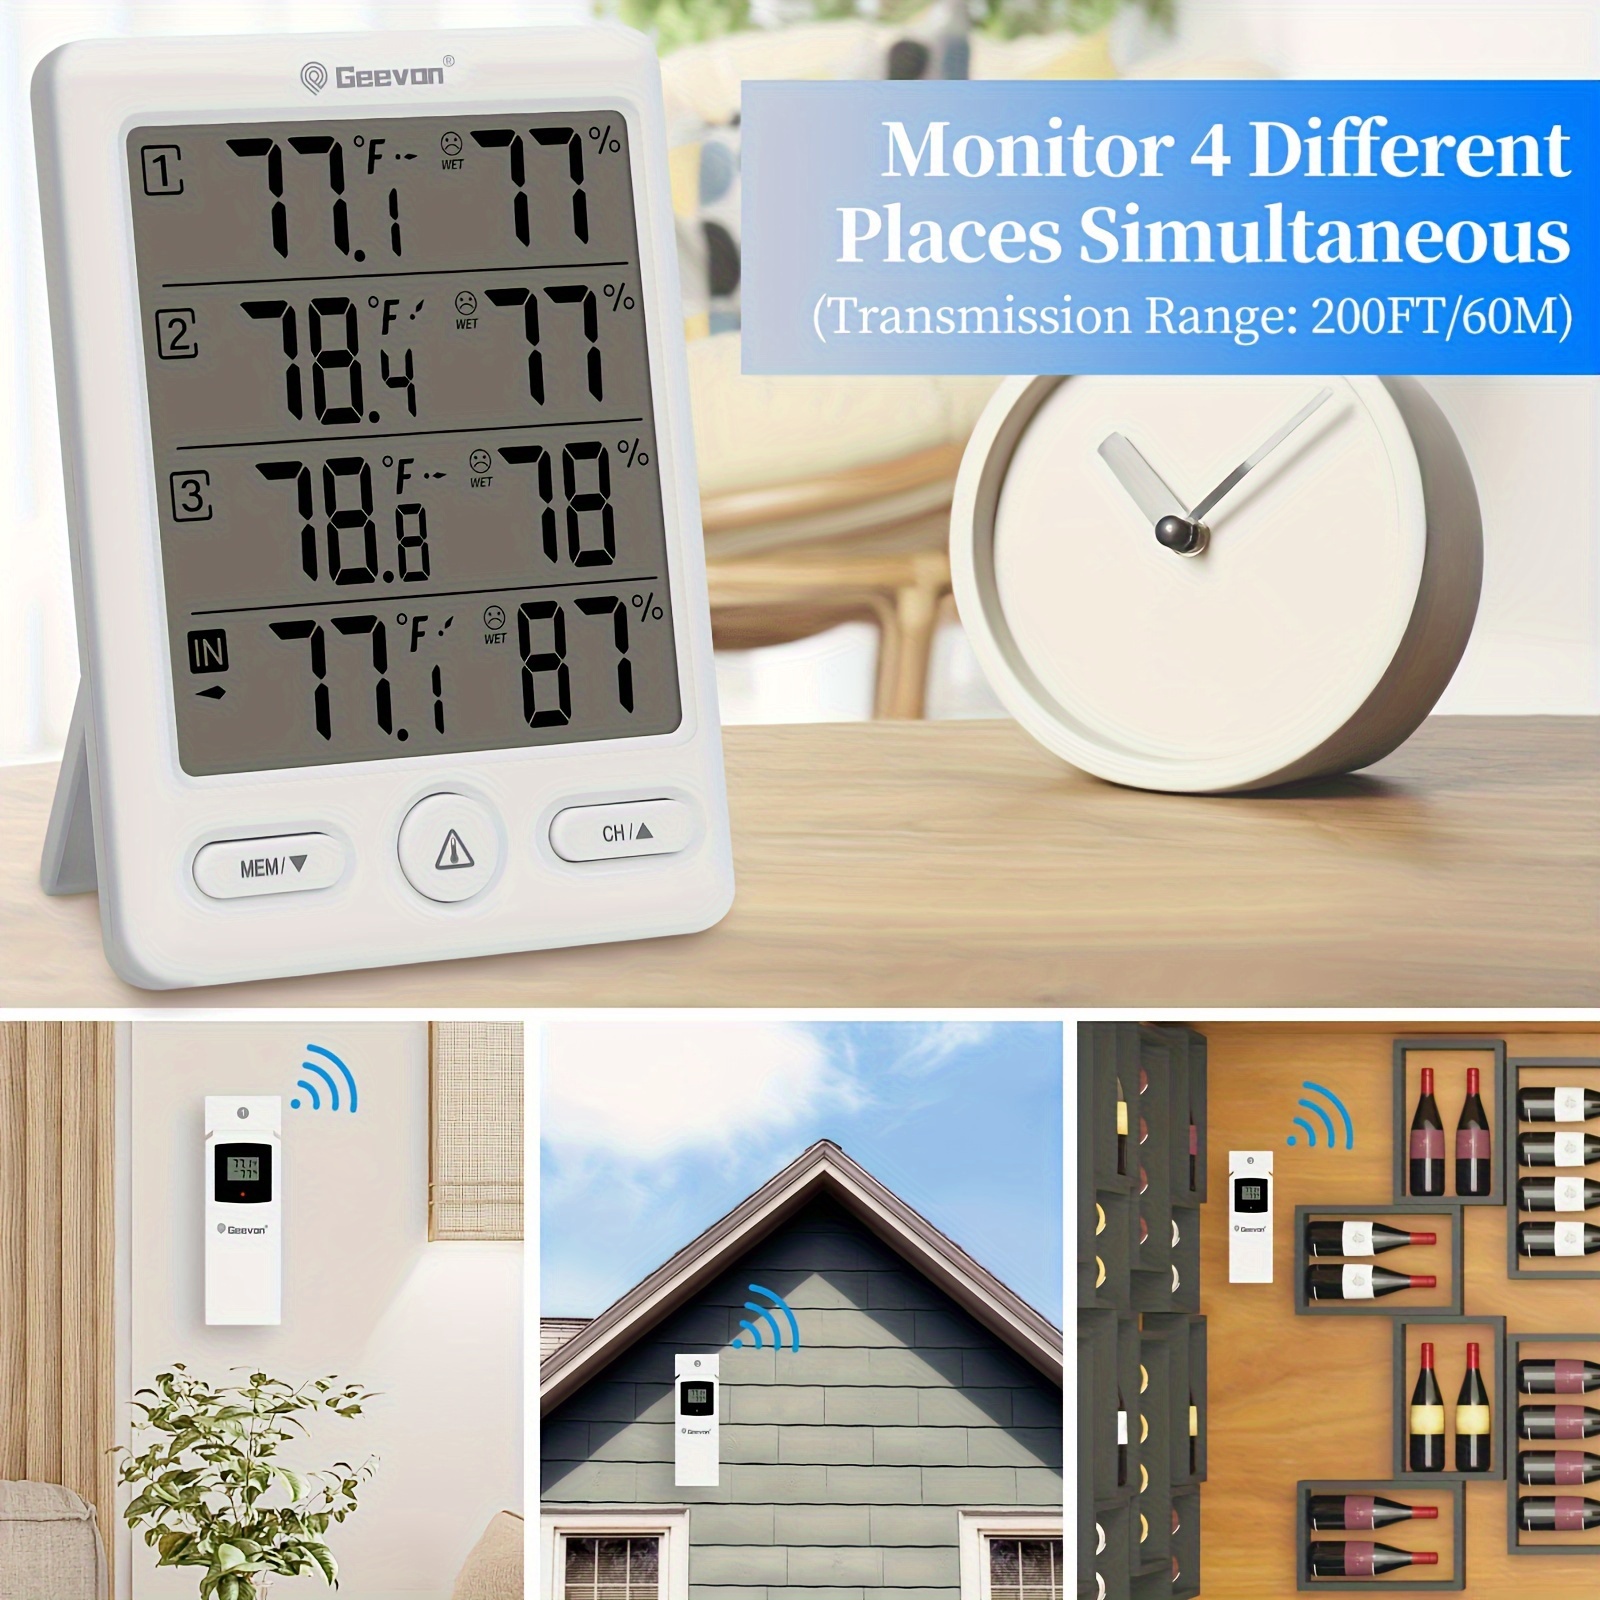 Geevon Indoor Outdoor Thermometer Wireless with 3 Remote Sensors, Digital Hygrometer Thermometer, Wireless Temperature Humidity Monitor Gauge with